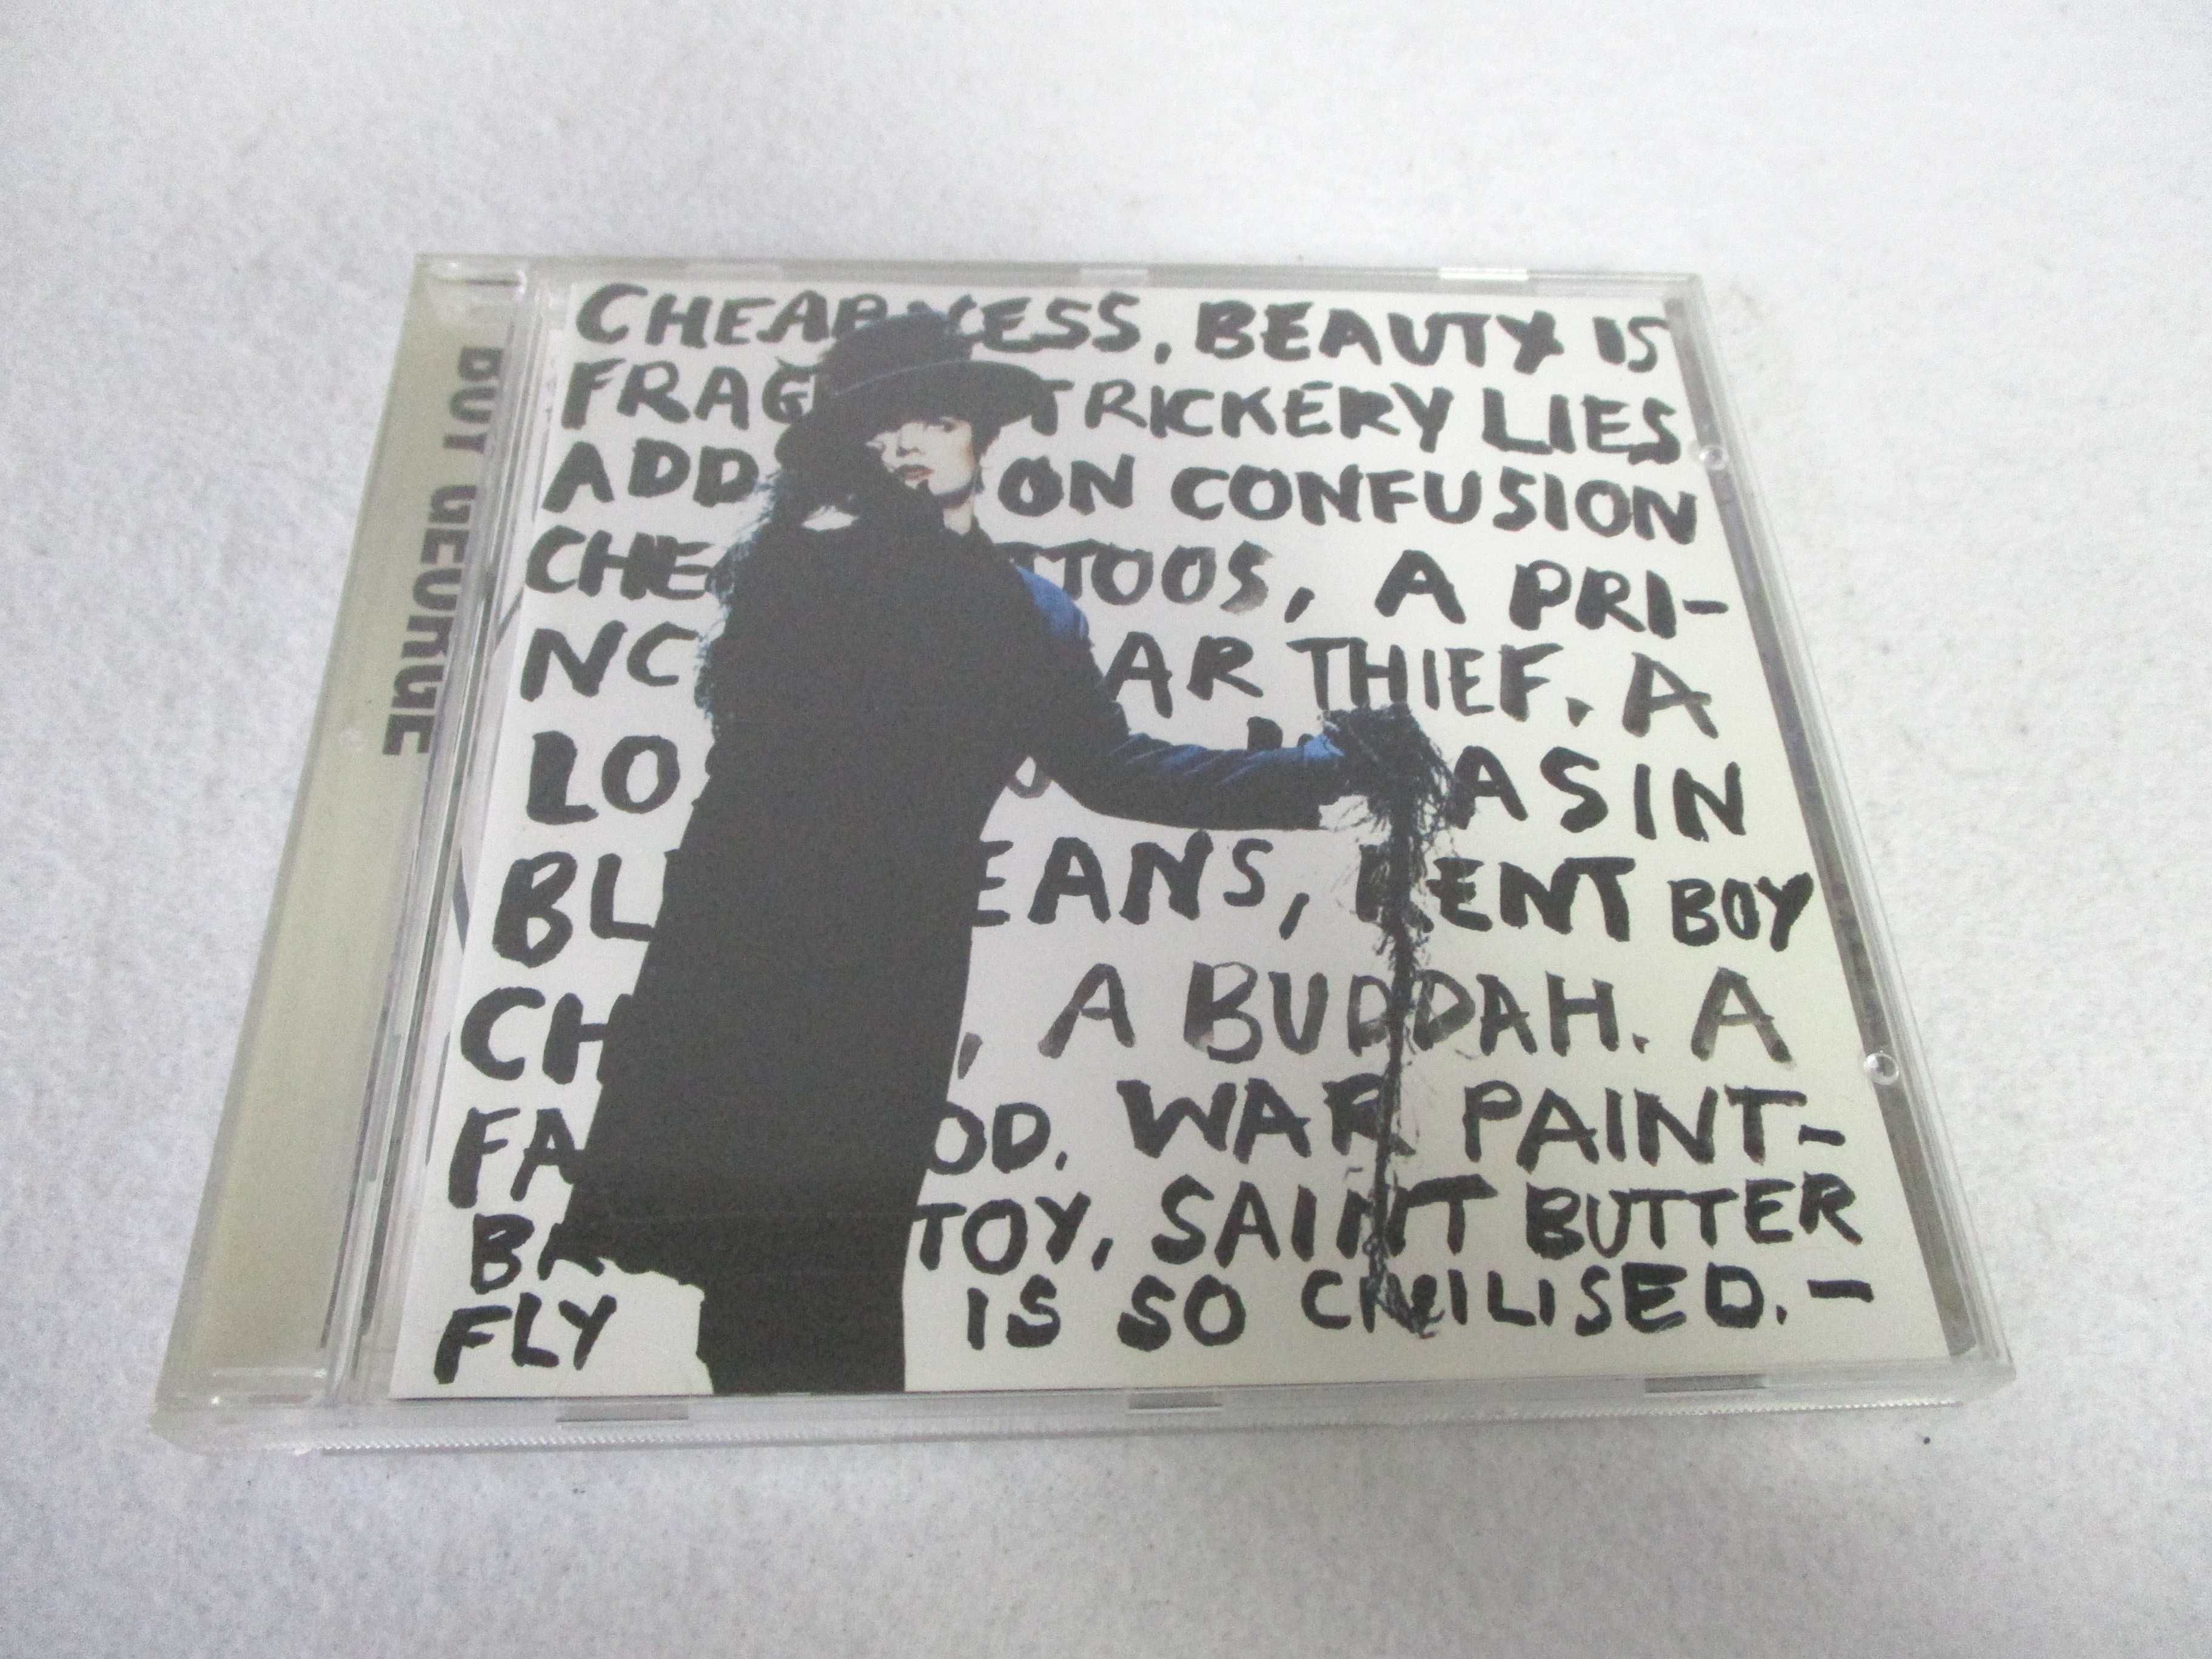 AC06081 【中古】 【CD】 CHAPNESS AND BEAUT